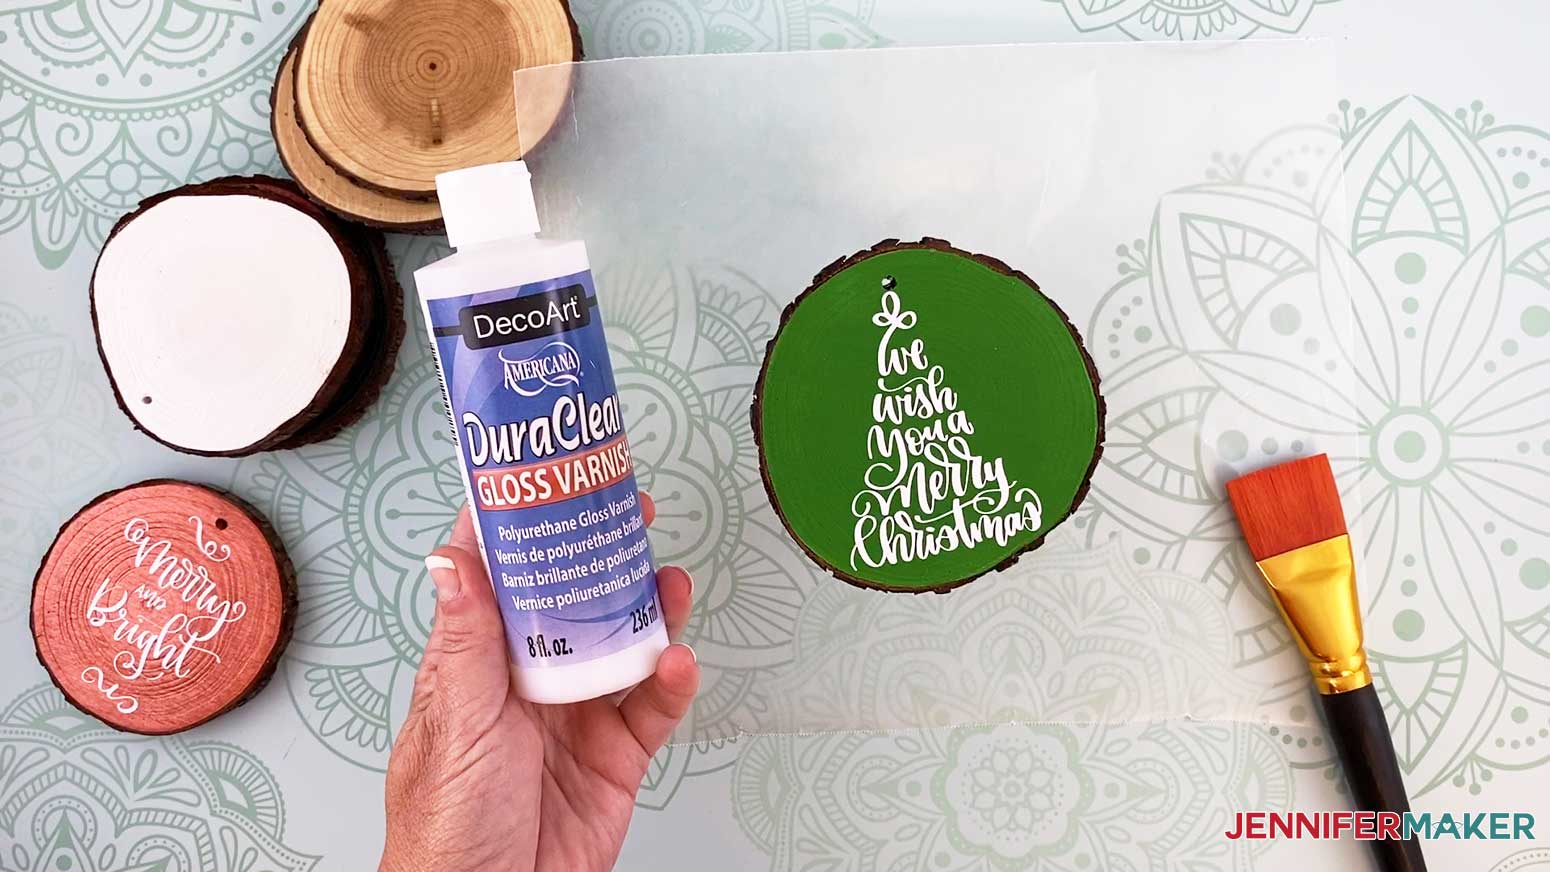 Grab DuraClear Gloss Varnish for the wood slice ornaments